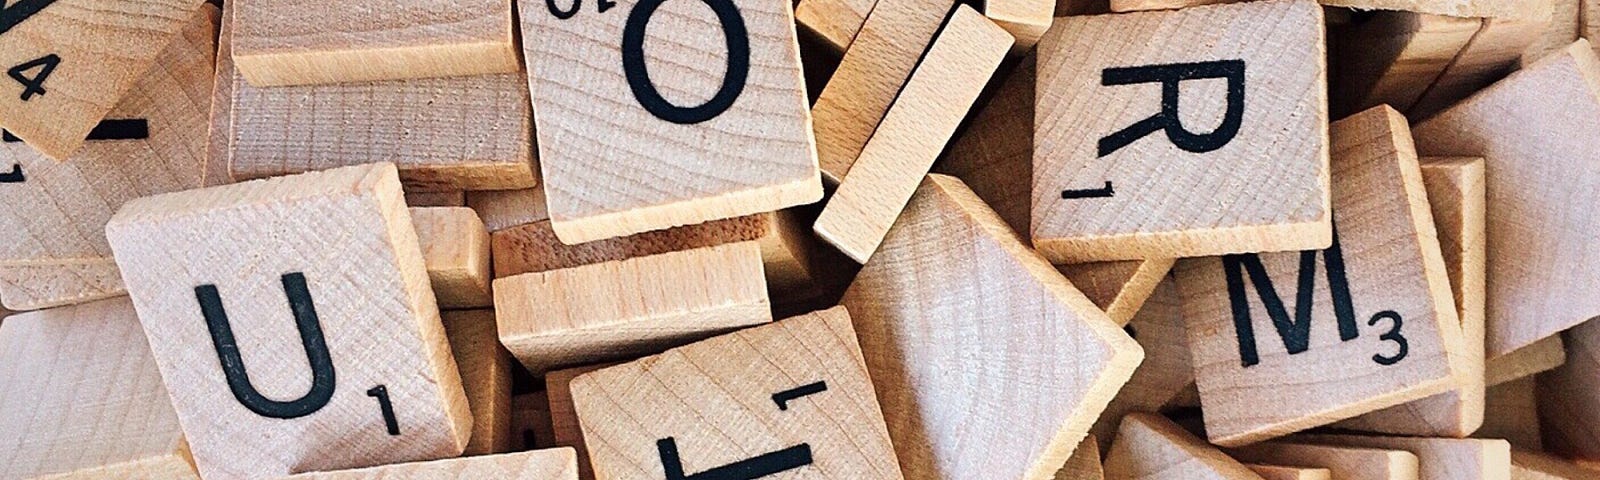 Close up view of Scrabble tiles, showing q, u, a, r, t, I, v, and m. Several tiles upside down.